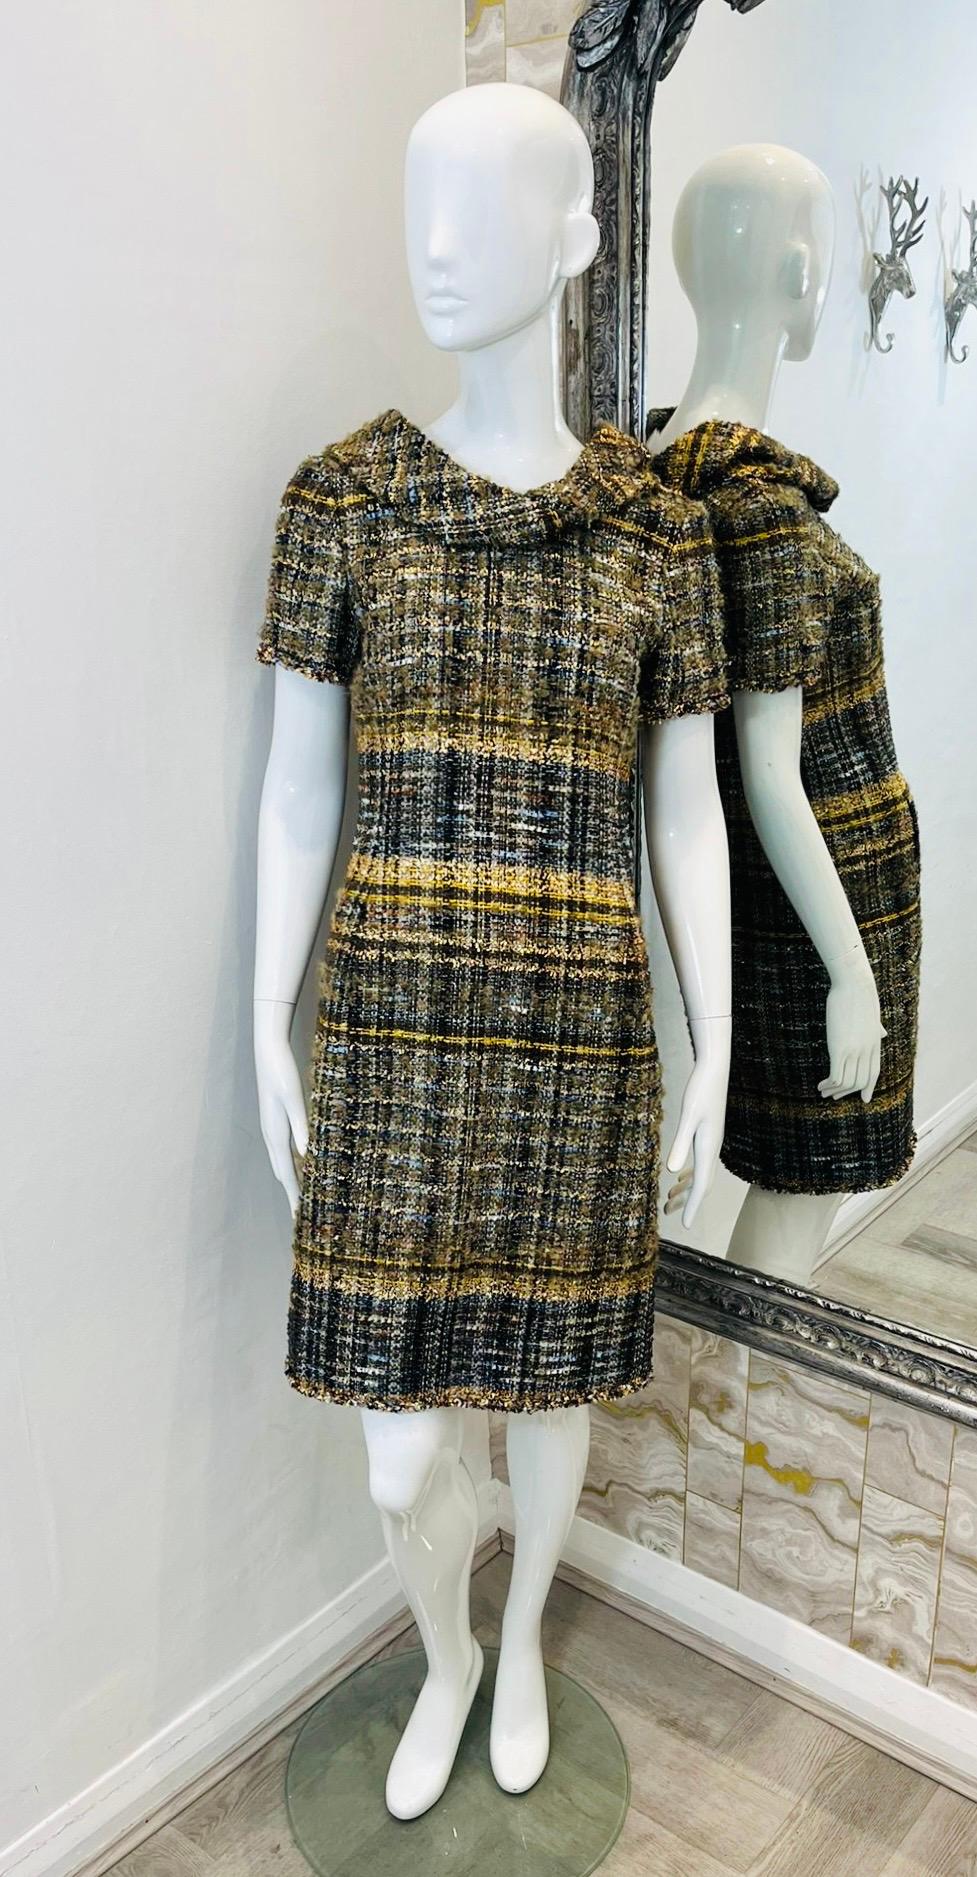 Oscar De La Renta Metallic Tweed Wool Dress

Brown, short sleeved shift dress detailed with metallic threads and accents of yellow and baby blue.

Featuring round, full collar, below-the-knee length and side pockets.

Size – 10UK

Condition – Very